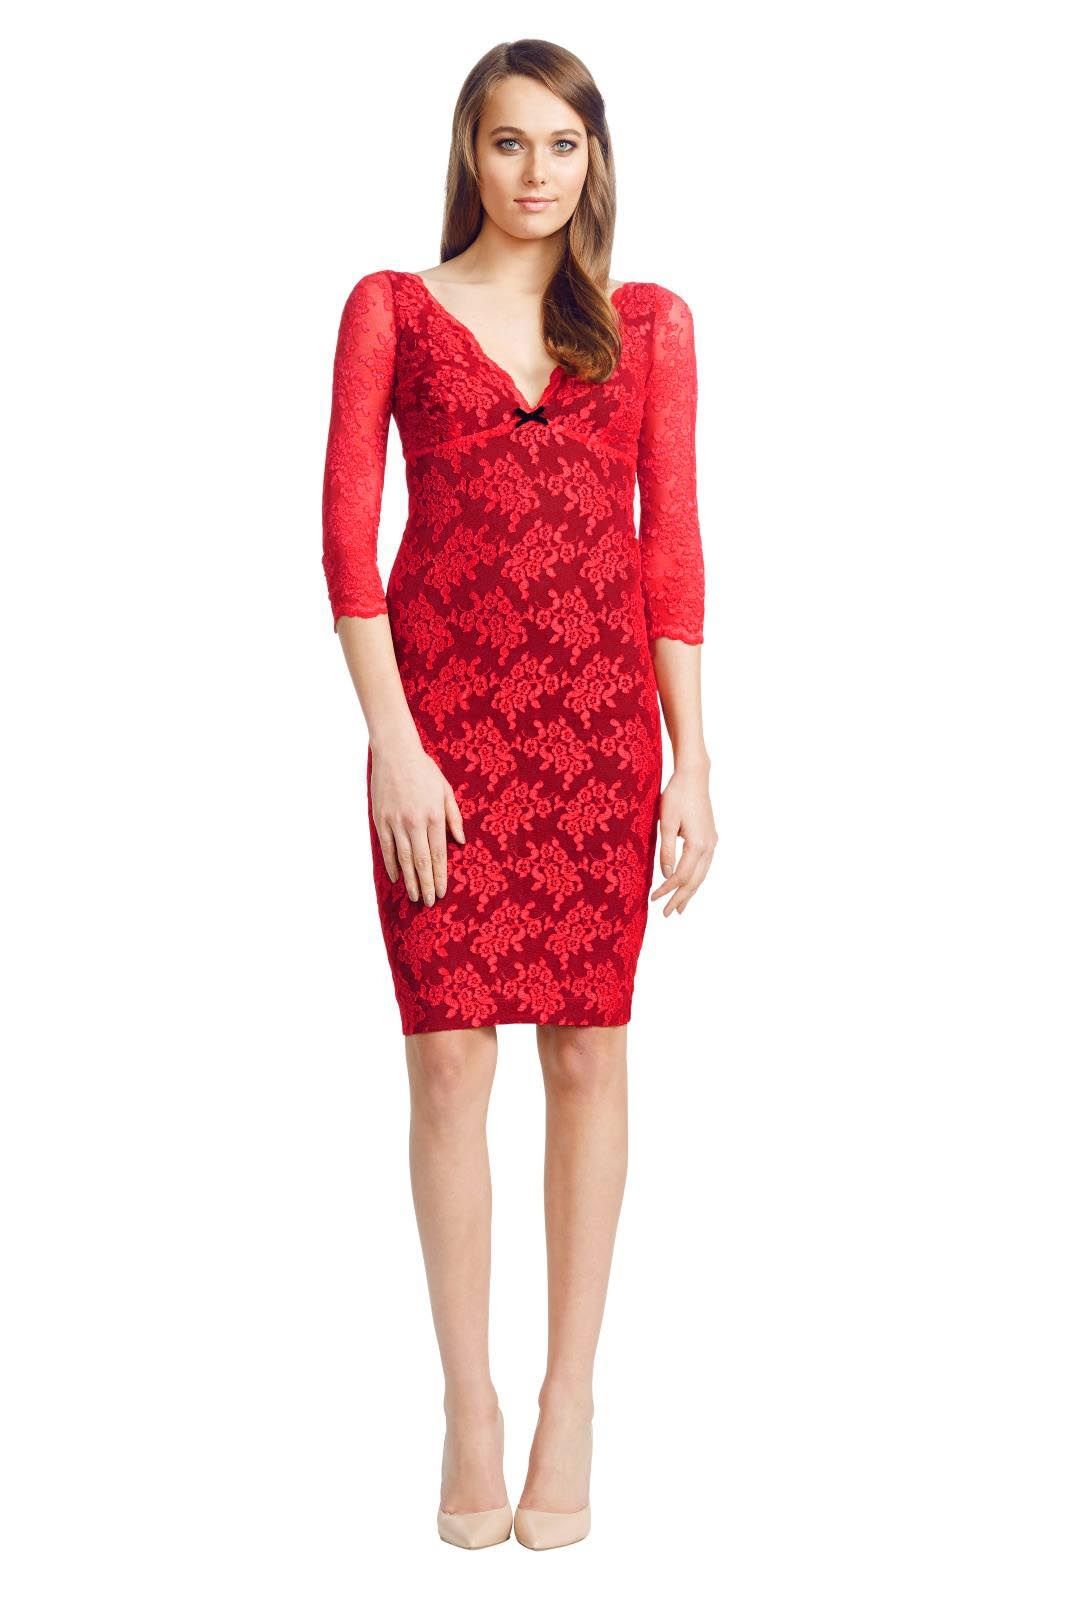 Wheels and Dollbaby - Red Scallop Lace FiFi Dress - Red - Front